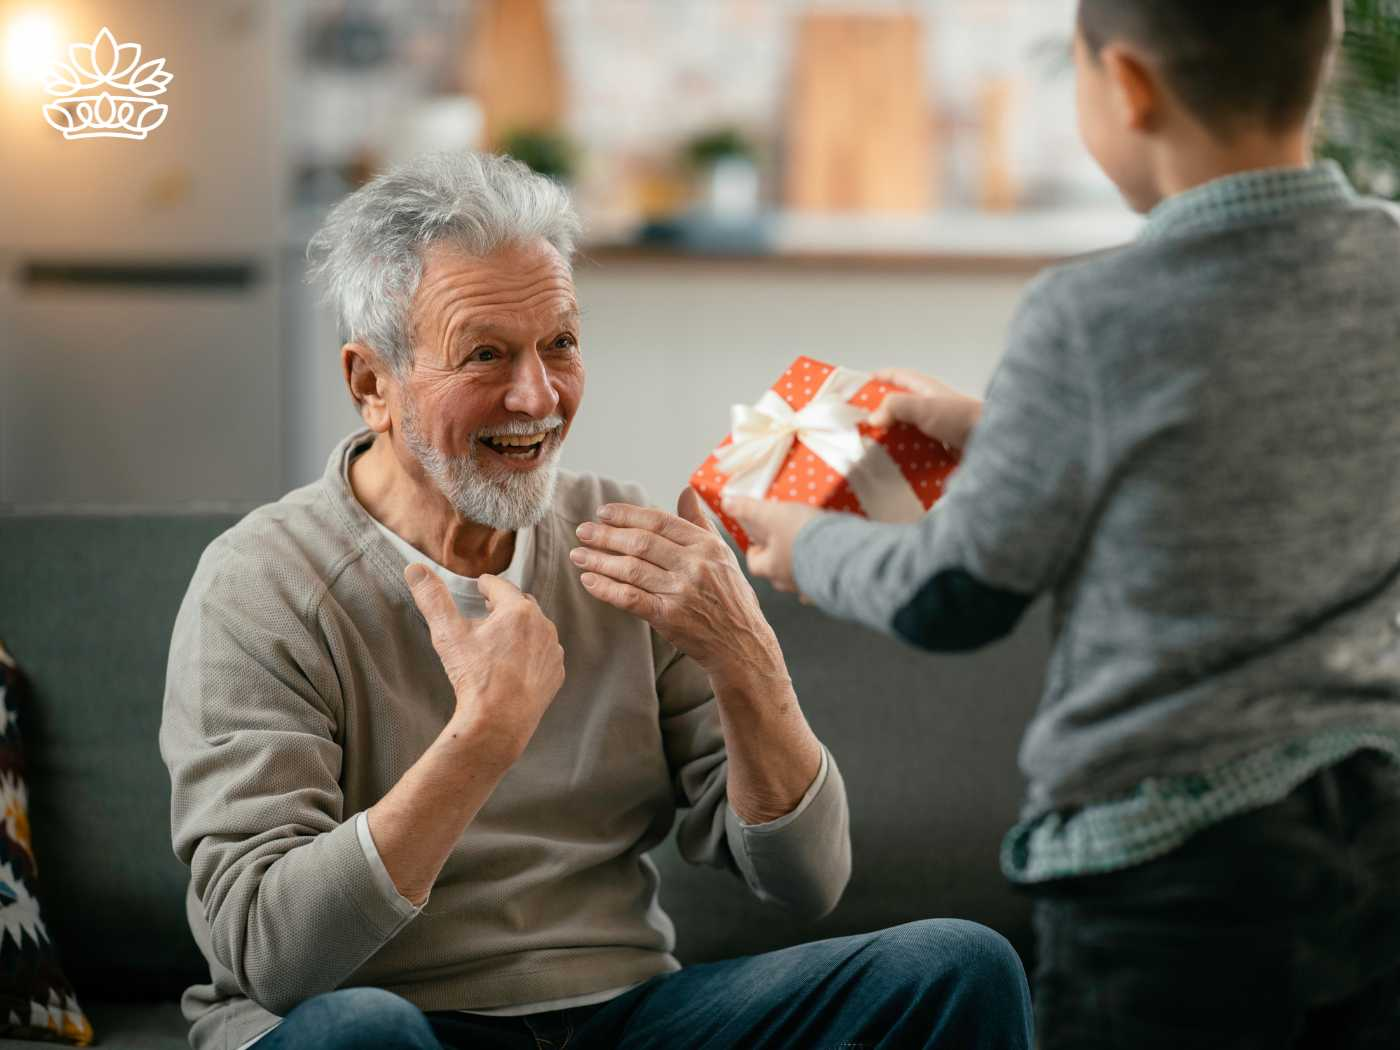 An excited elderly man receiving a wrapped gift from a young boy, from the Gifts Under R500 Collection at Fabulous Flowers and Gifts, including keywords such as brand, birthday, customers, and obsessed.